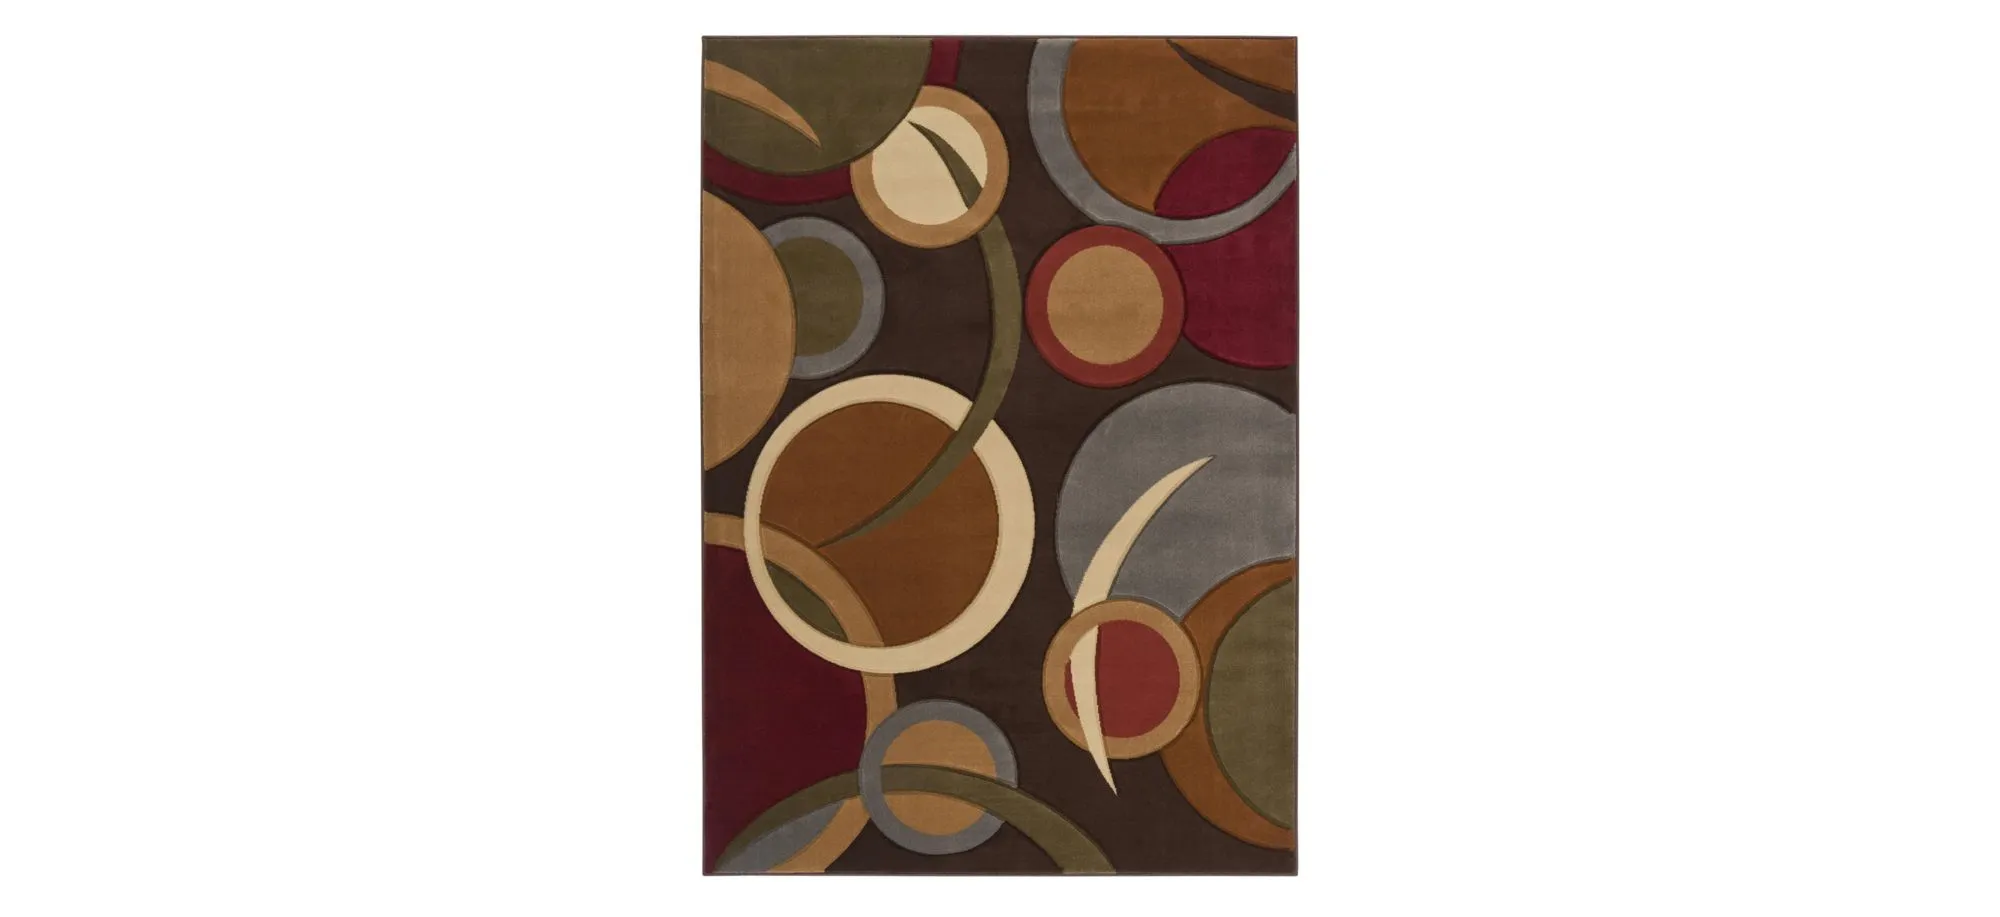 Remy Area Rug in Multi-colored by Surya